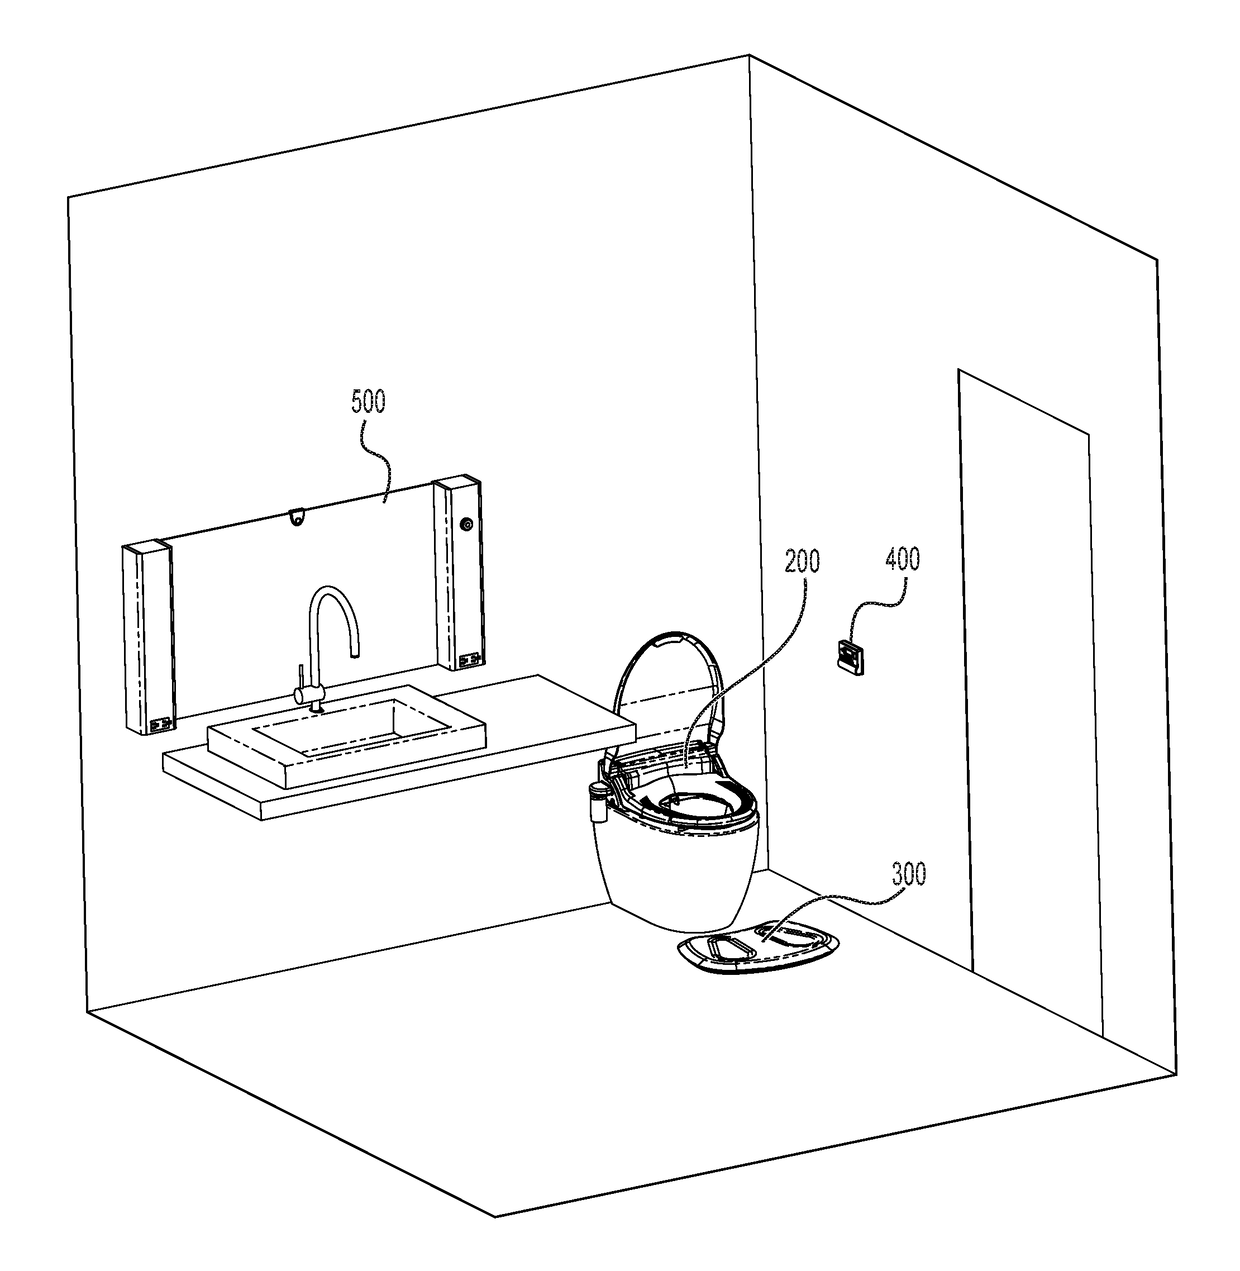 Biomonitoring devices, methods, and systems for use in a bathroom setting